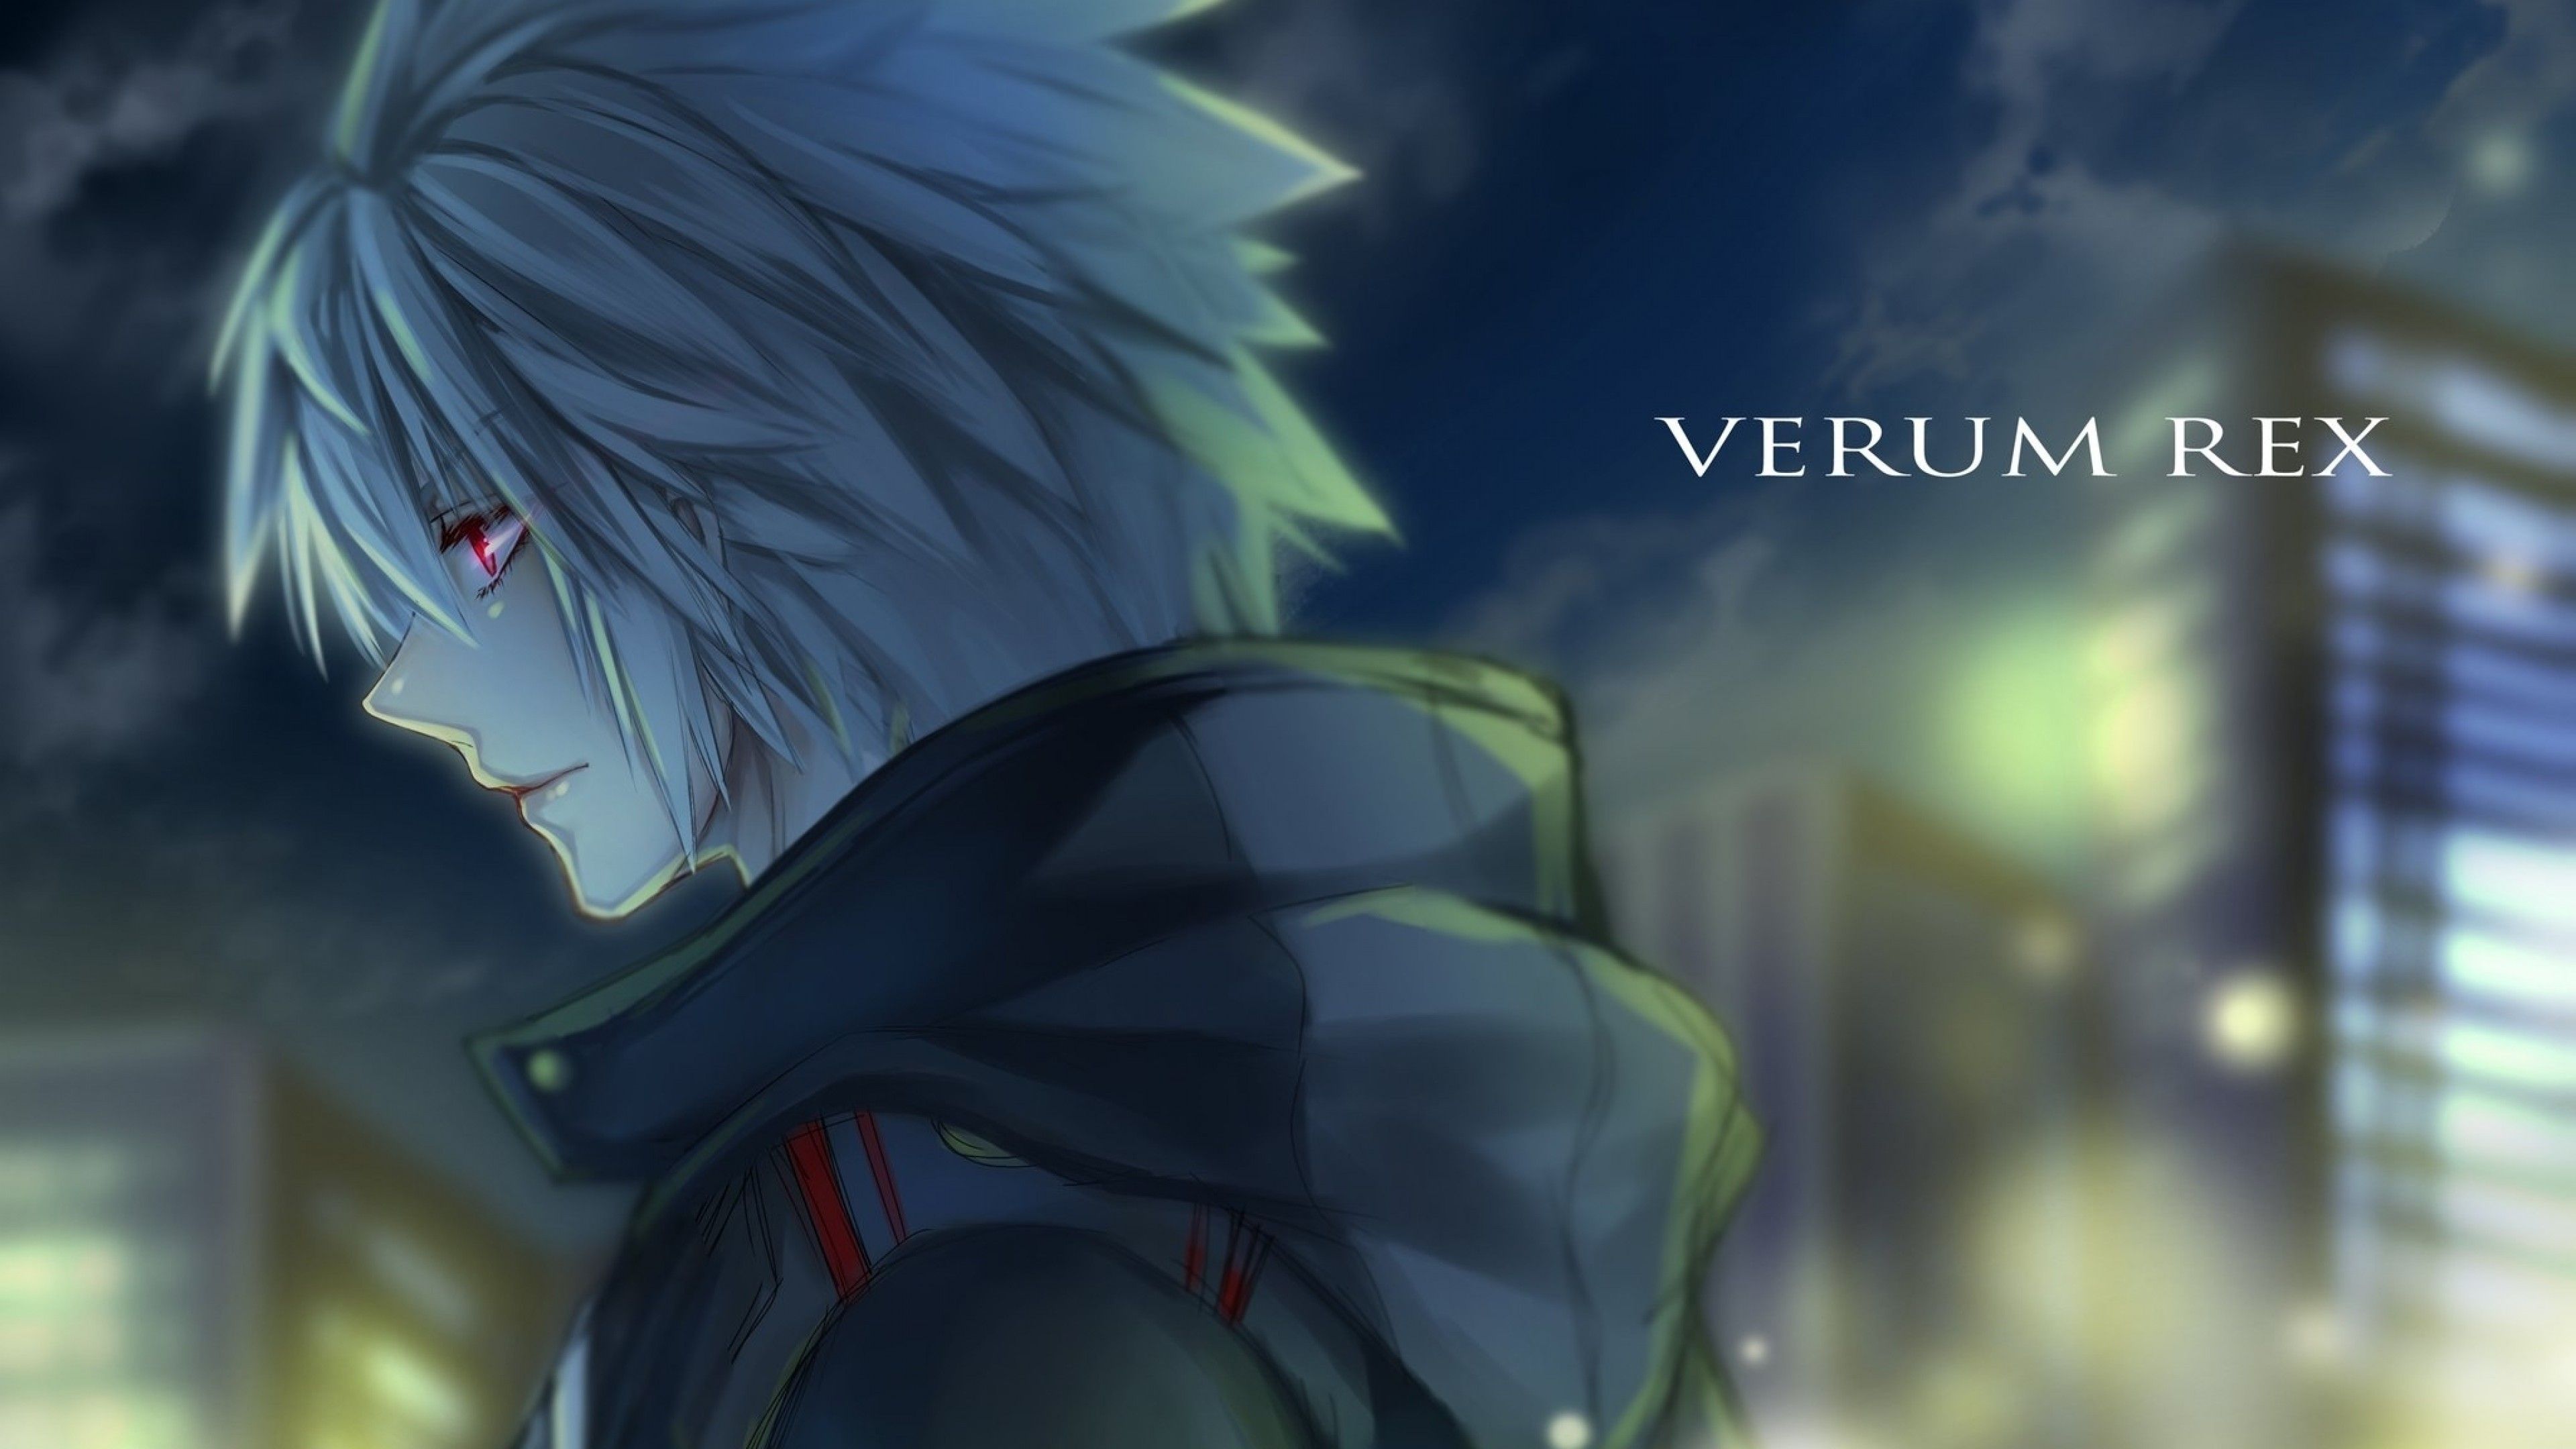 Download 3840x2160 Kingdom Hearts Iii, Verum Rex, Anime Games, Profile View, Red Eye Wallpaper for UHD TV